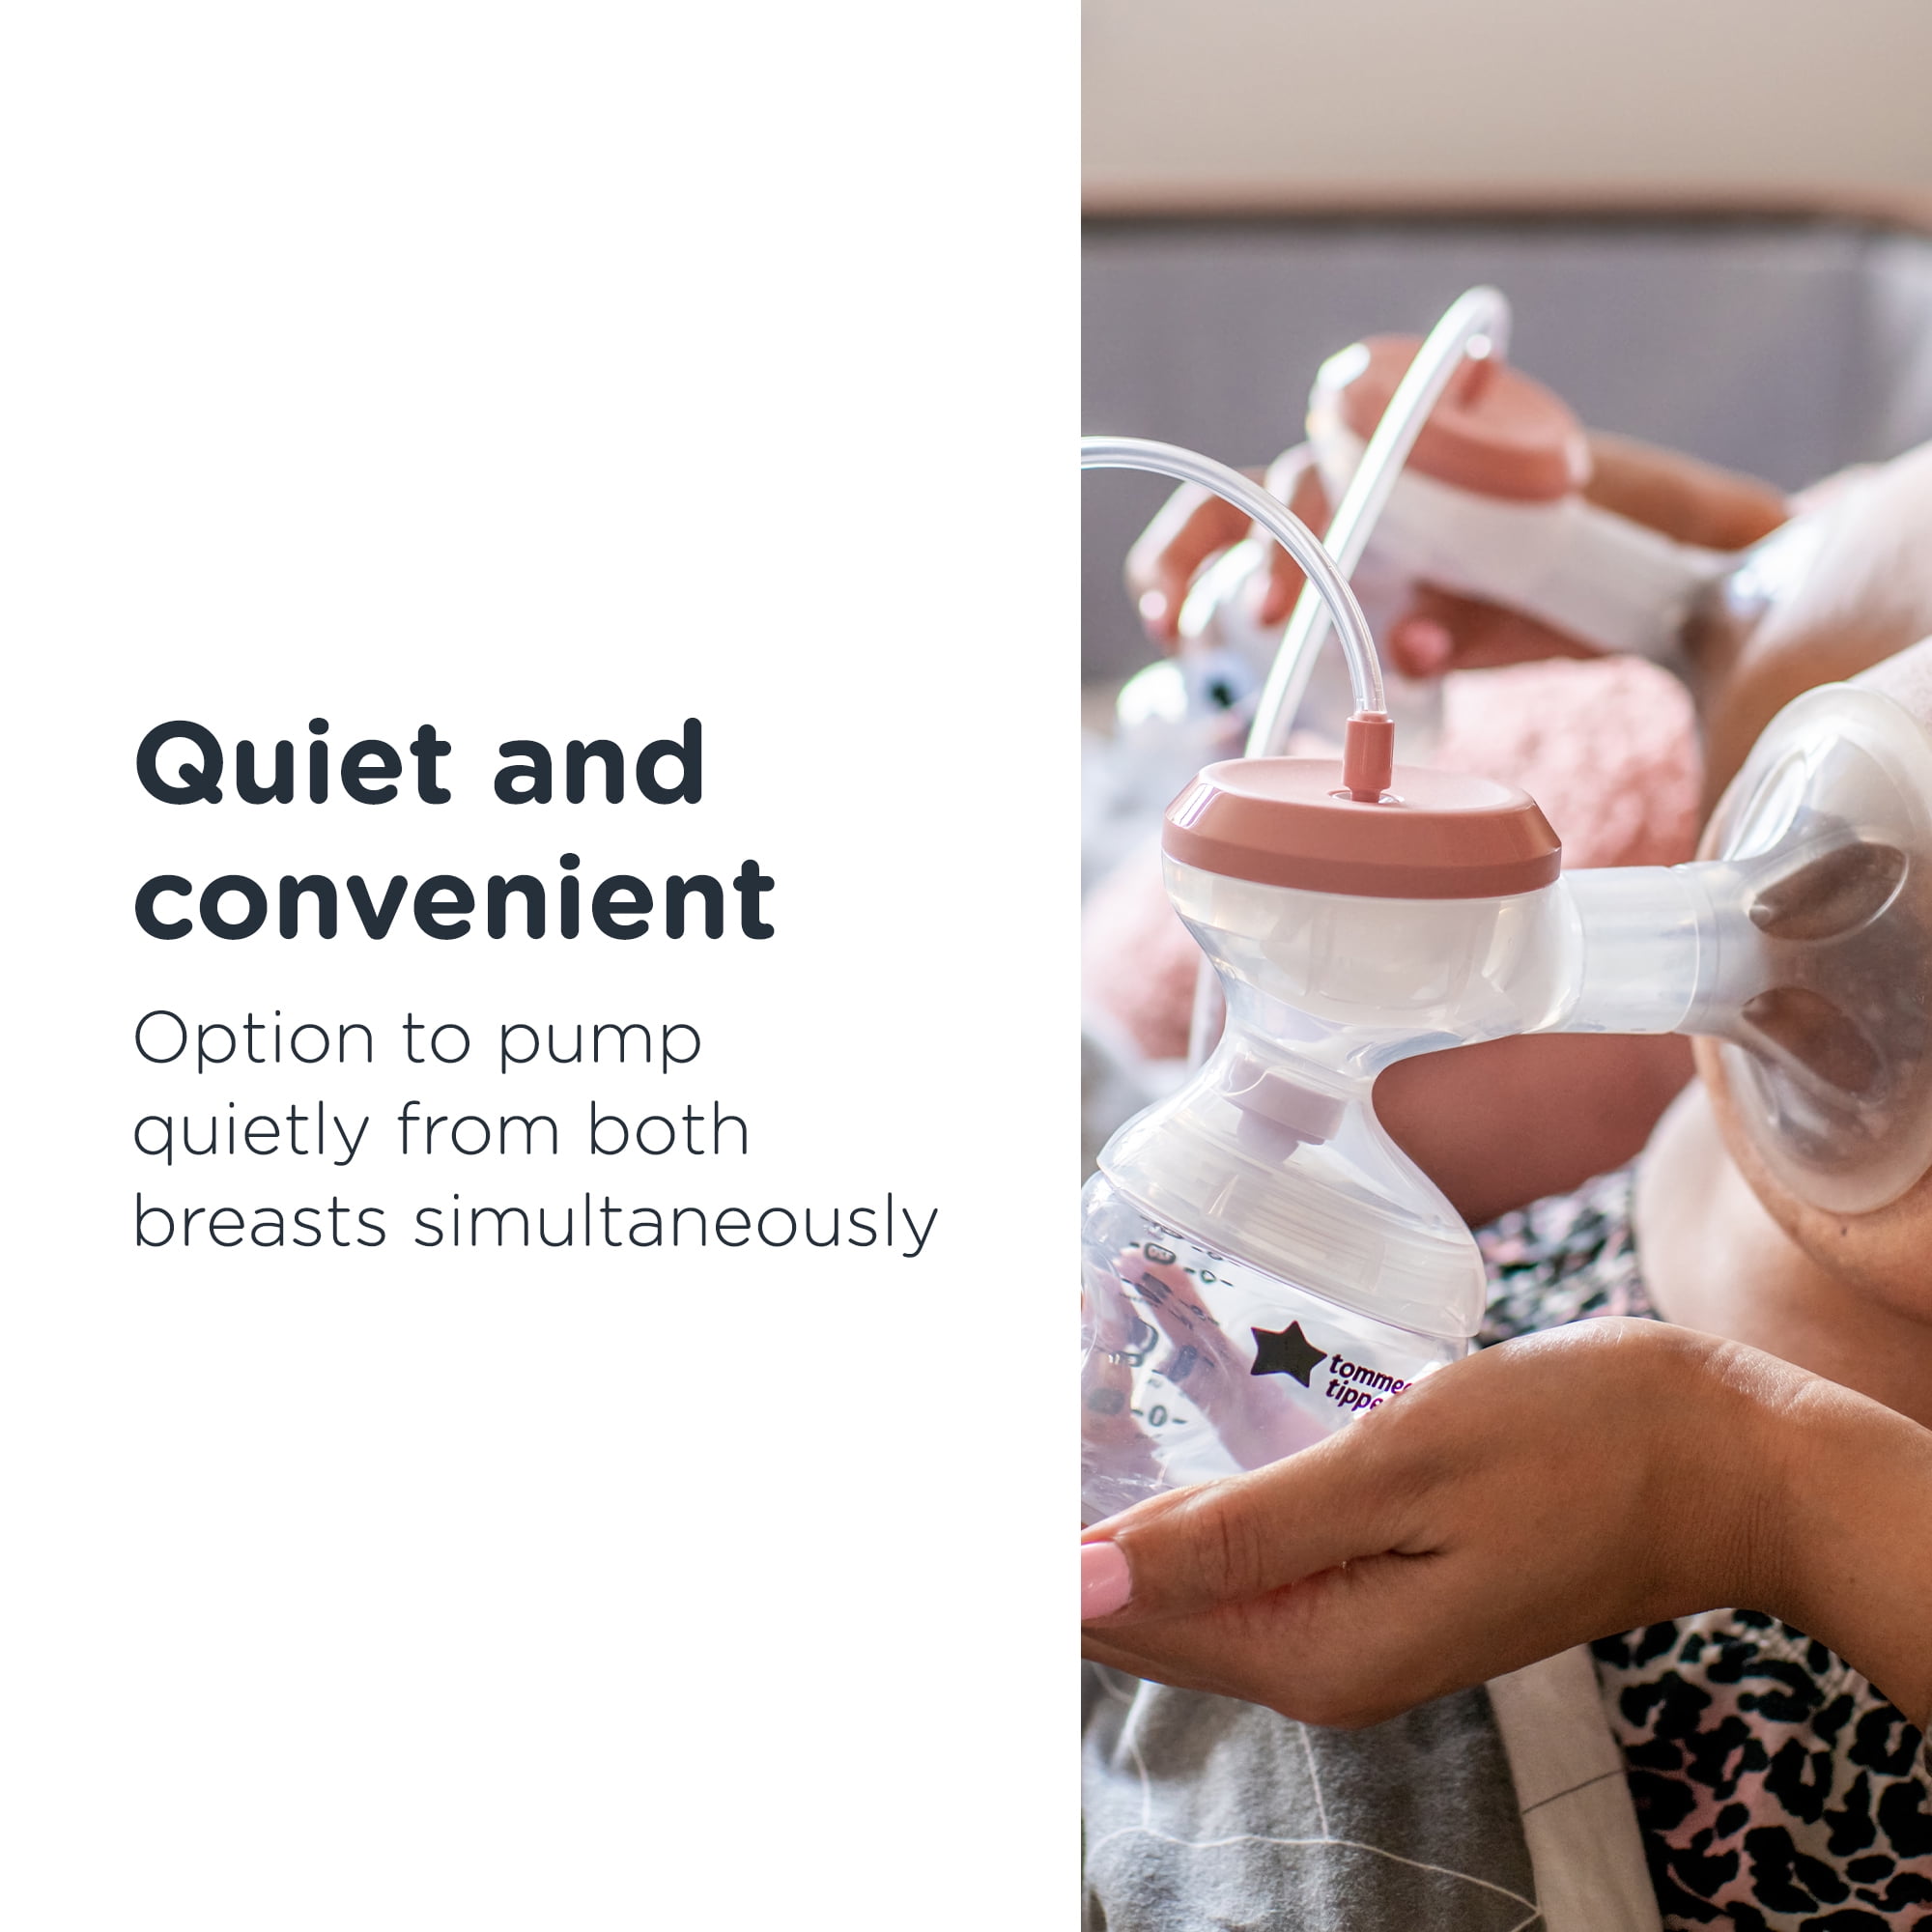 Tommee Tippee Complete Breastfeeding Kit has everything you need from  expressing breast milk to feeding baby The Made for Me Electric…